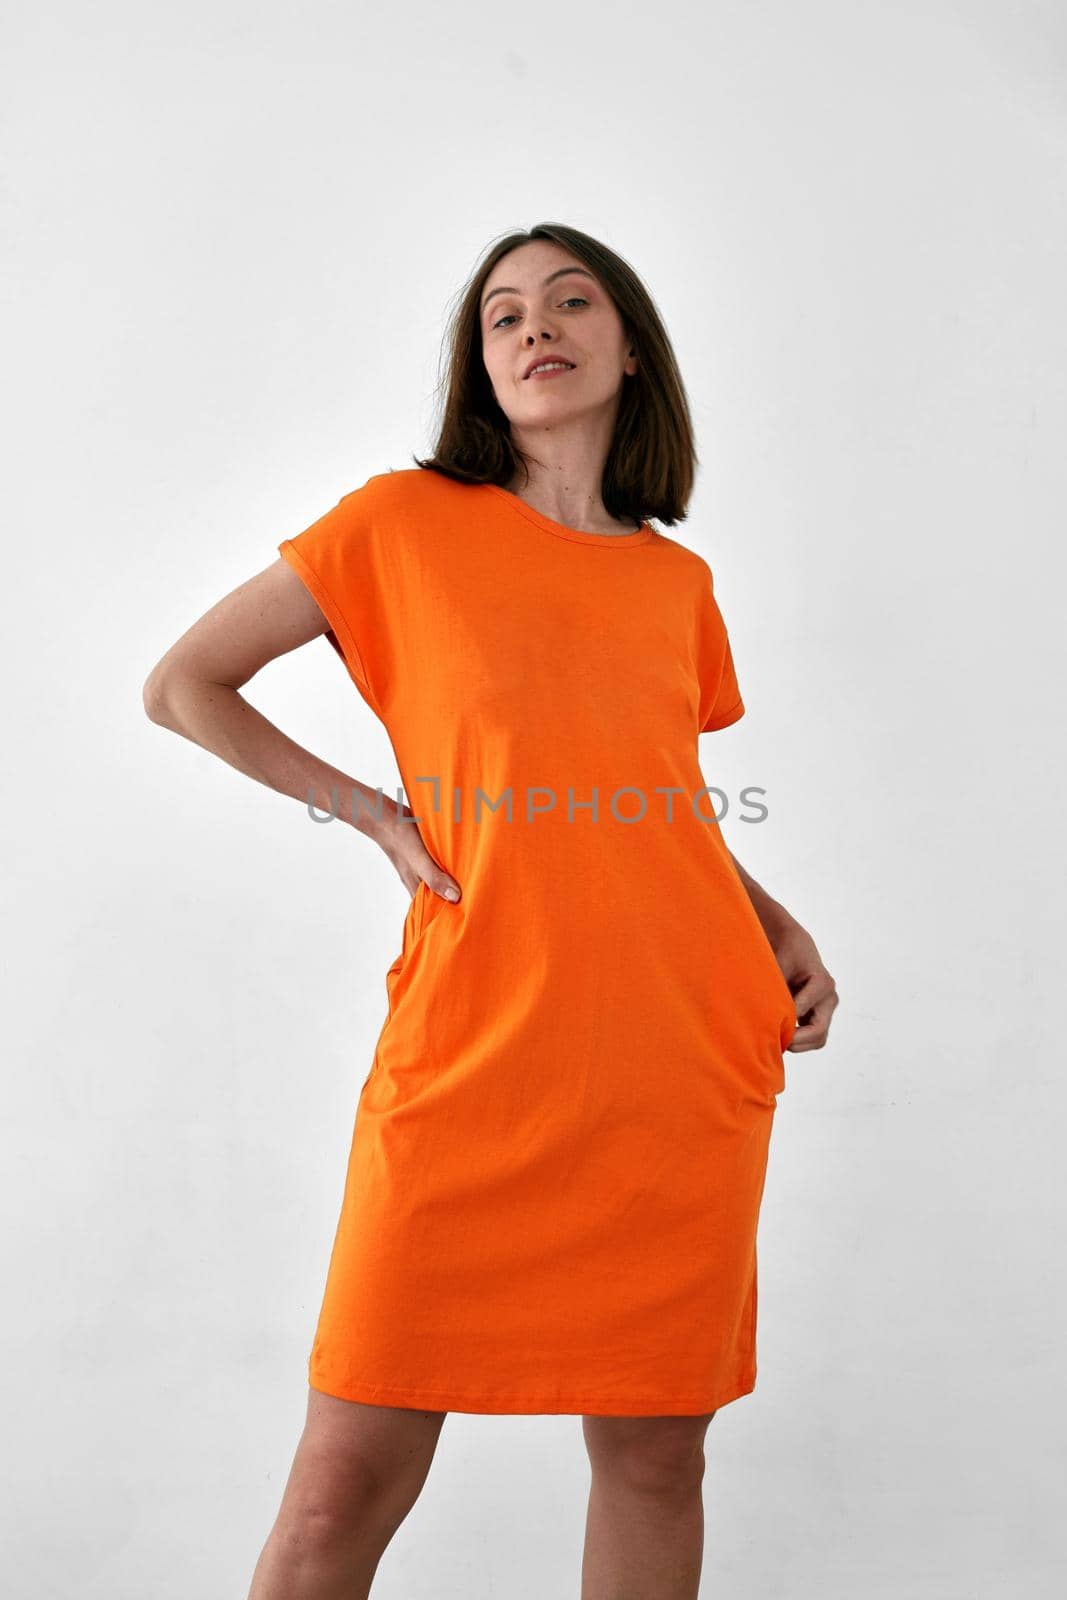 Cute female model in casual orange dress looking at camera against white background